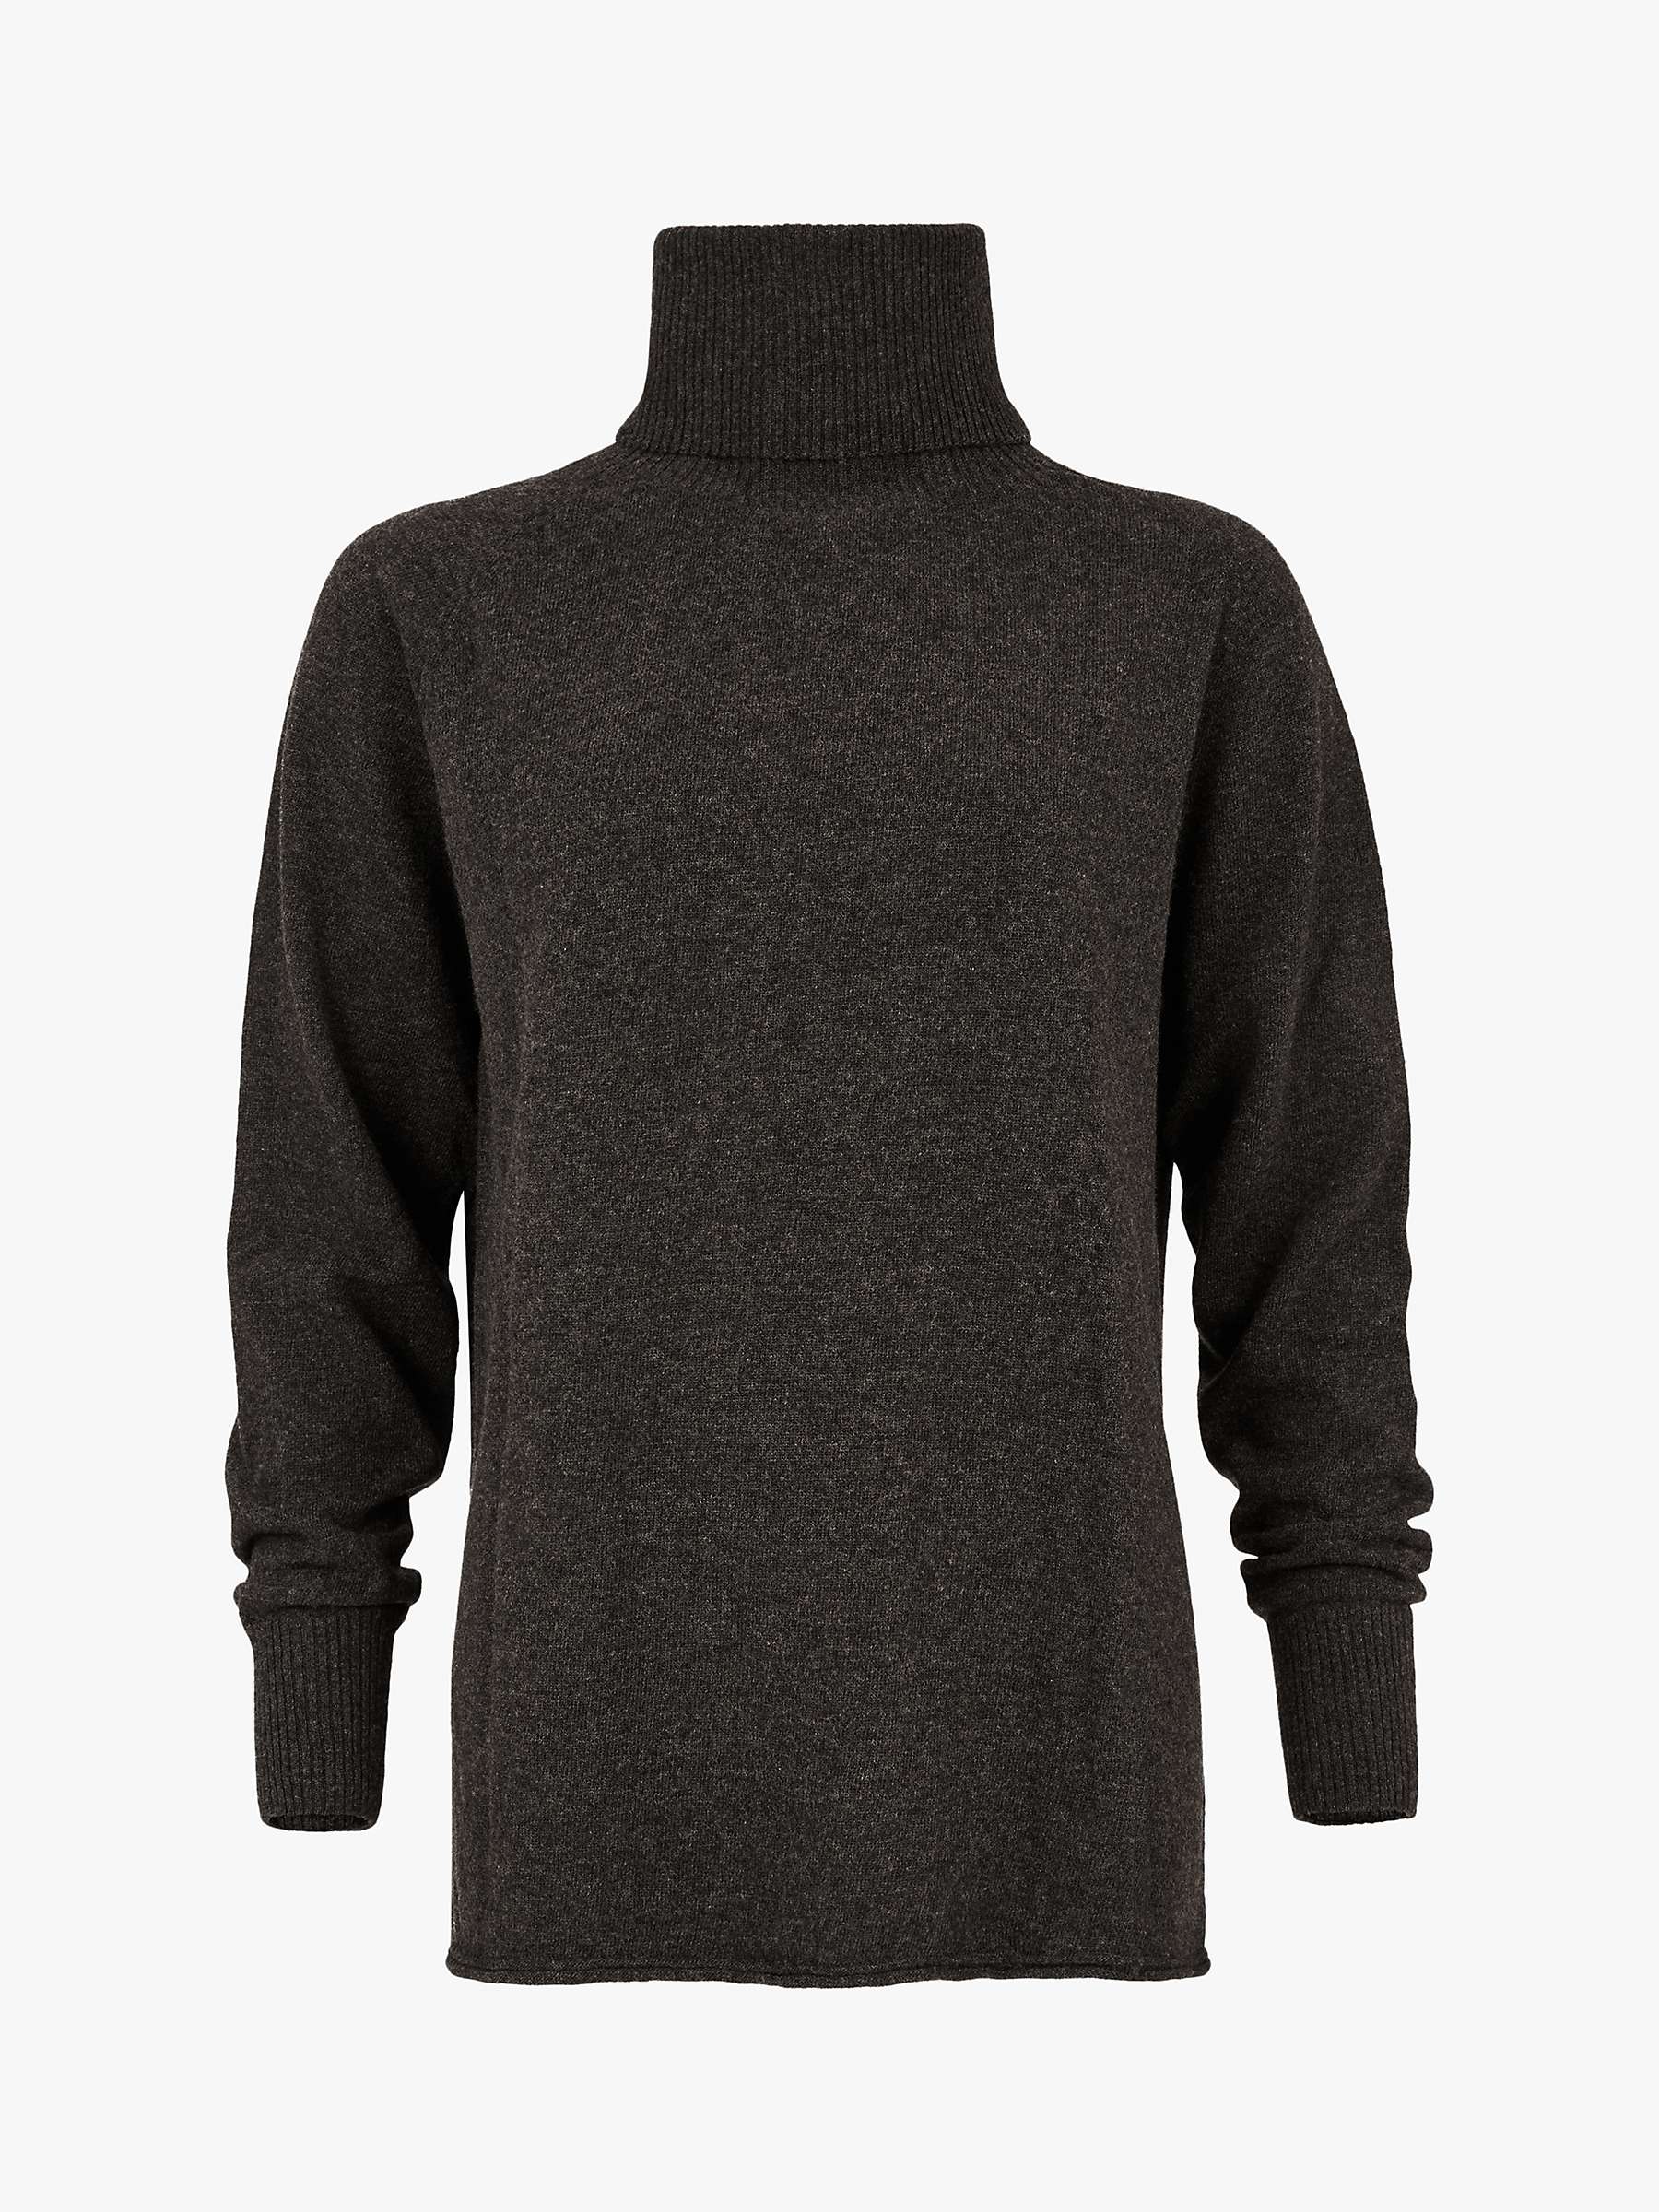 Celtic & Co. Geelong Slouch Roll Neck Jumper, Charcoal at John Lewis ...